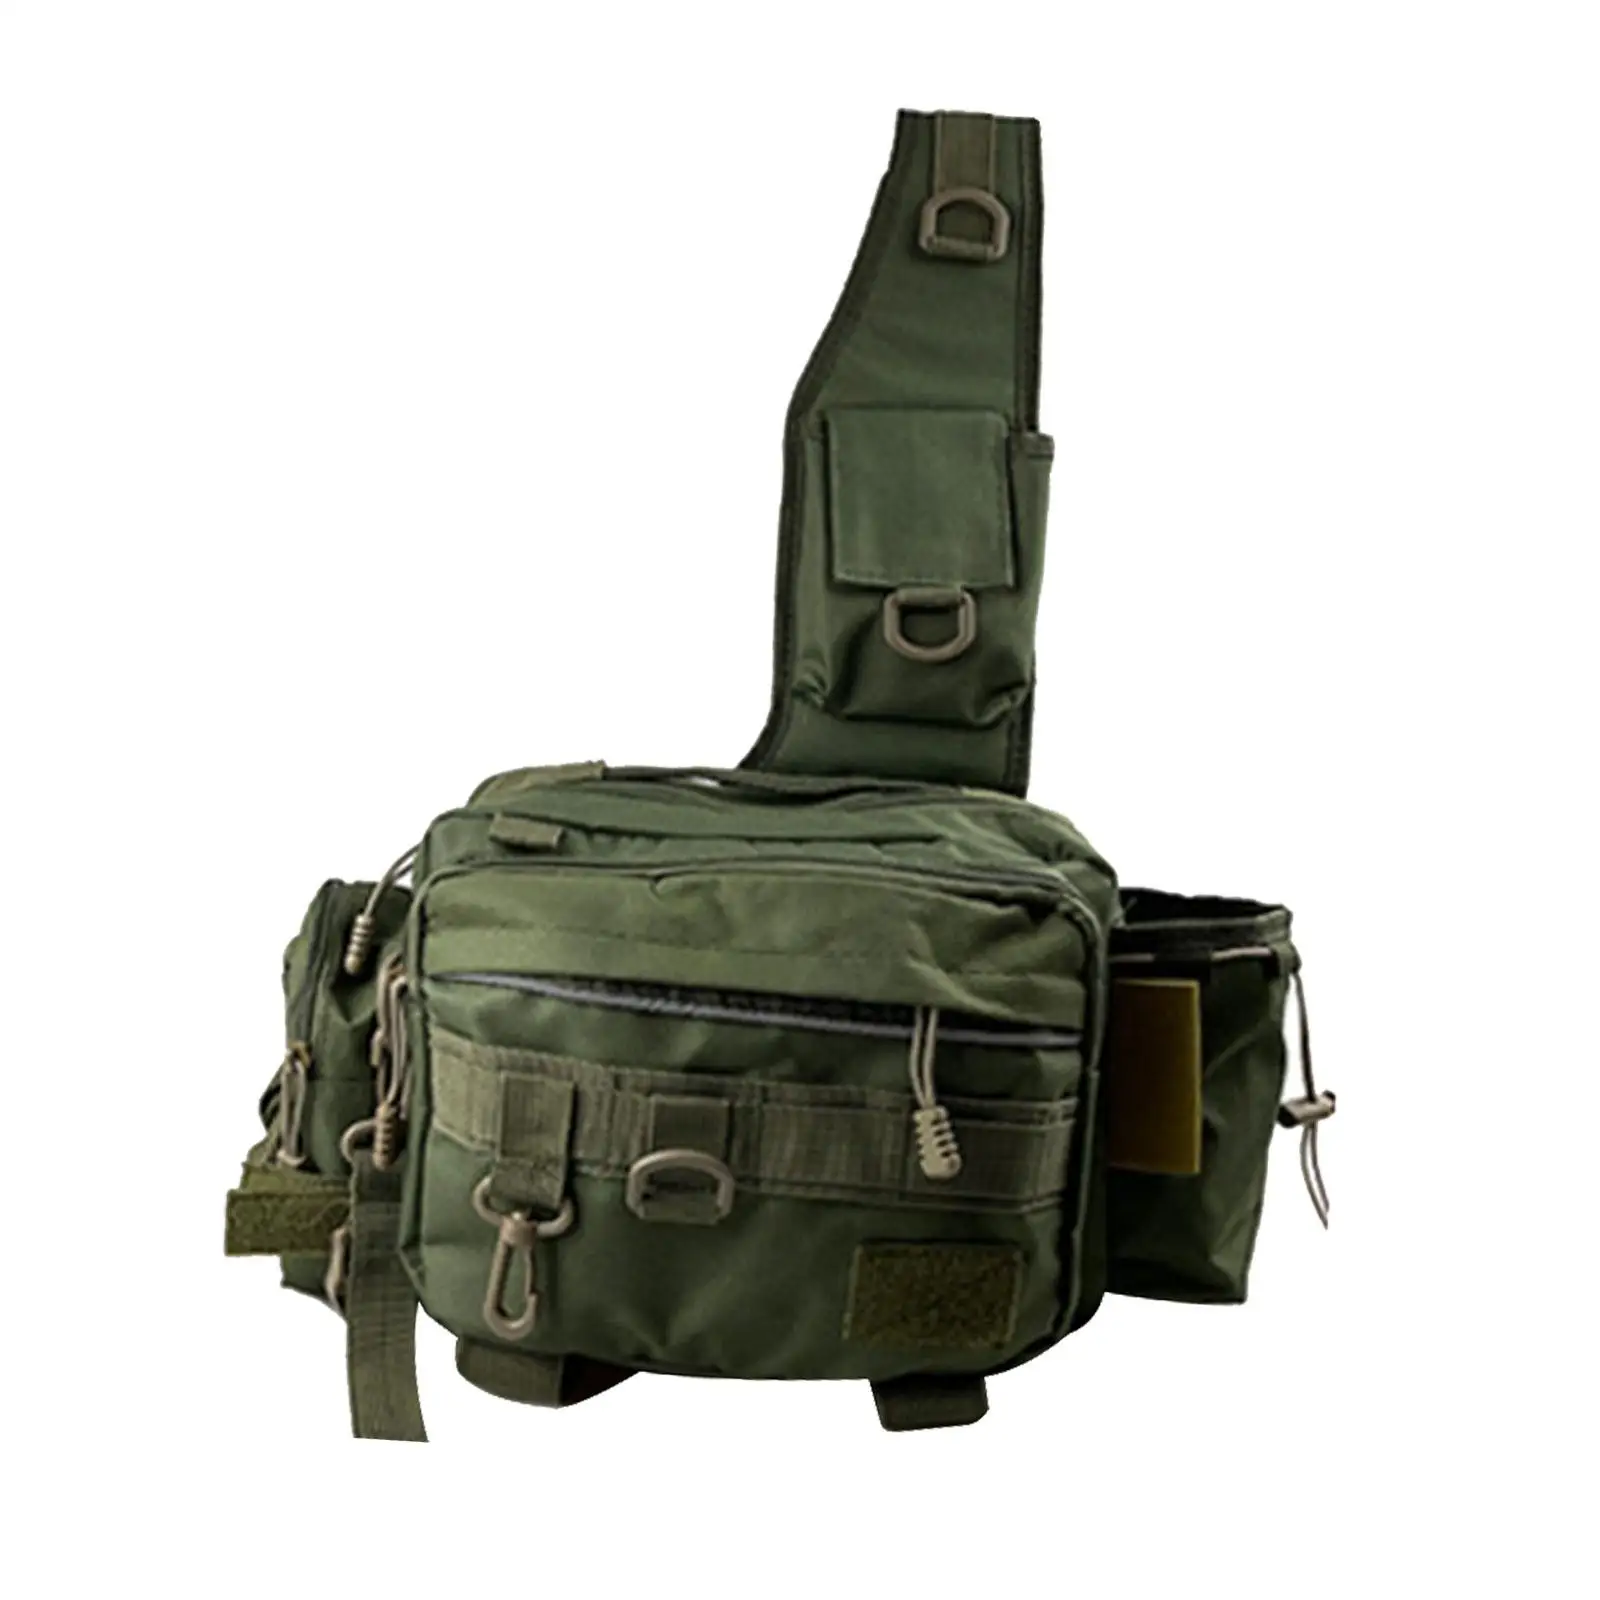 Fishing Tackle Storage Bag Rod Holder Chest Pack for Hunting Trekking Hiking